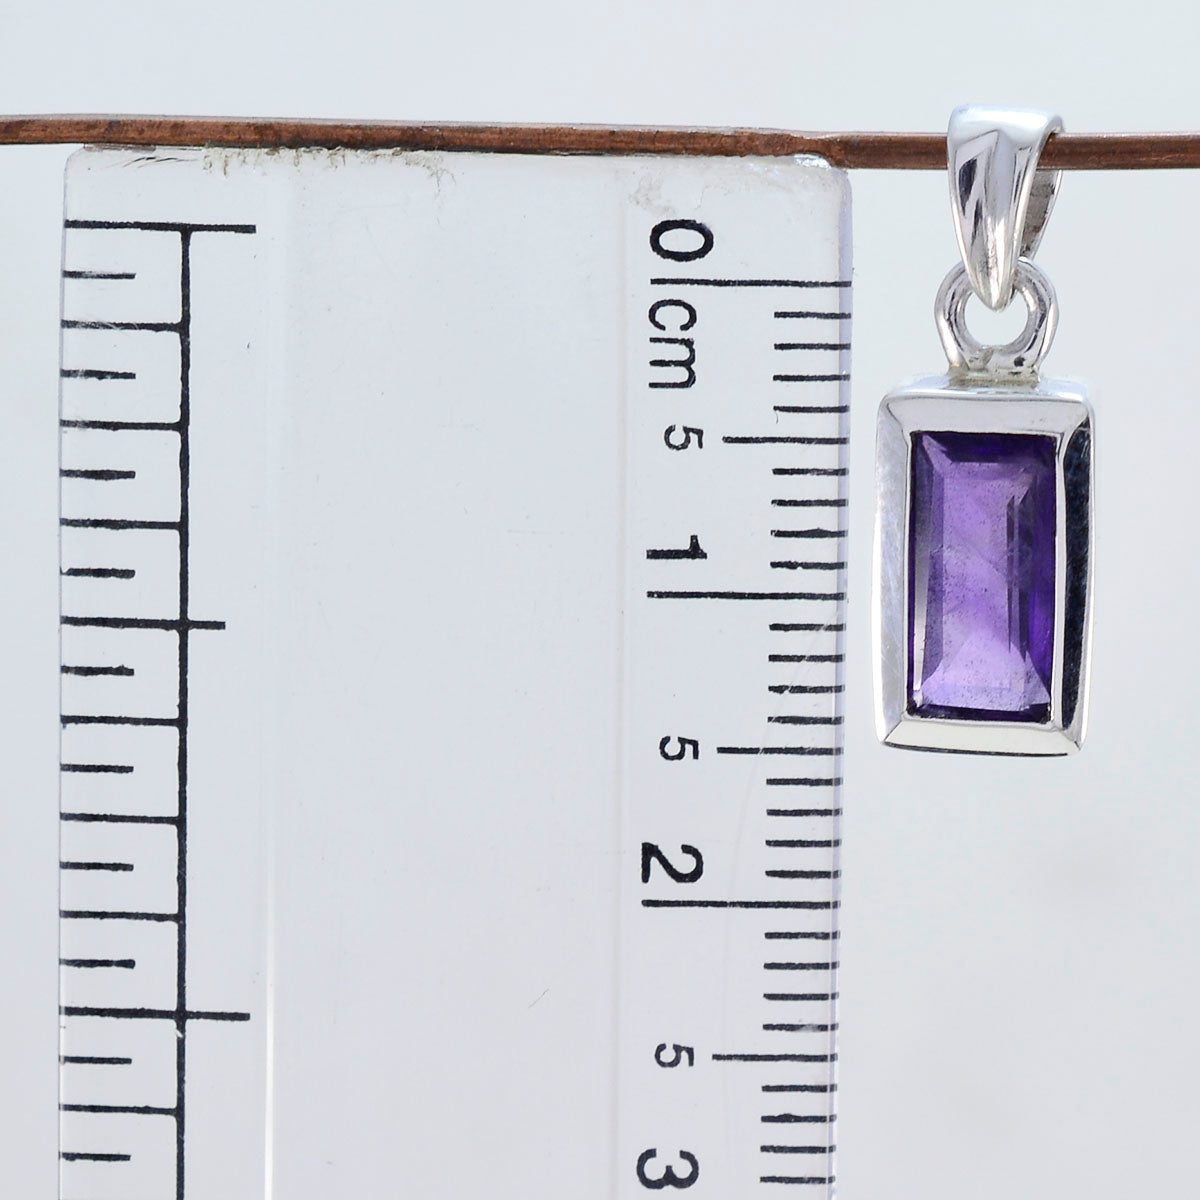 Riyo Genuine Gems Octogon Faceted Purple Amethyst 925 Sterling Silver Pendant gift for college